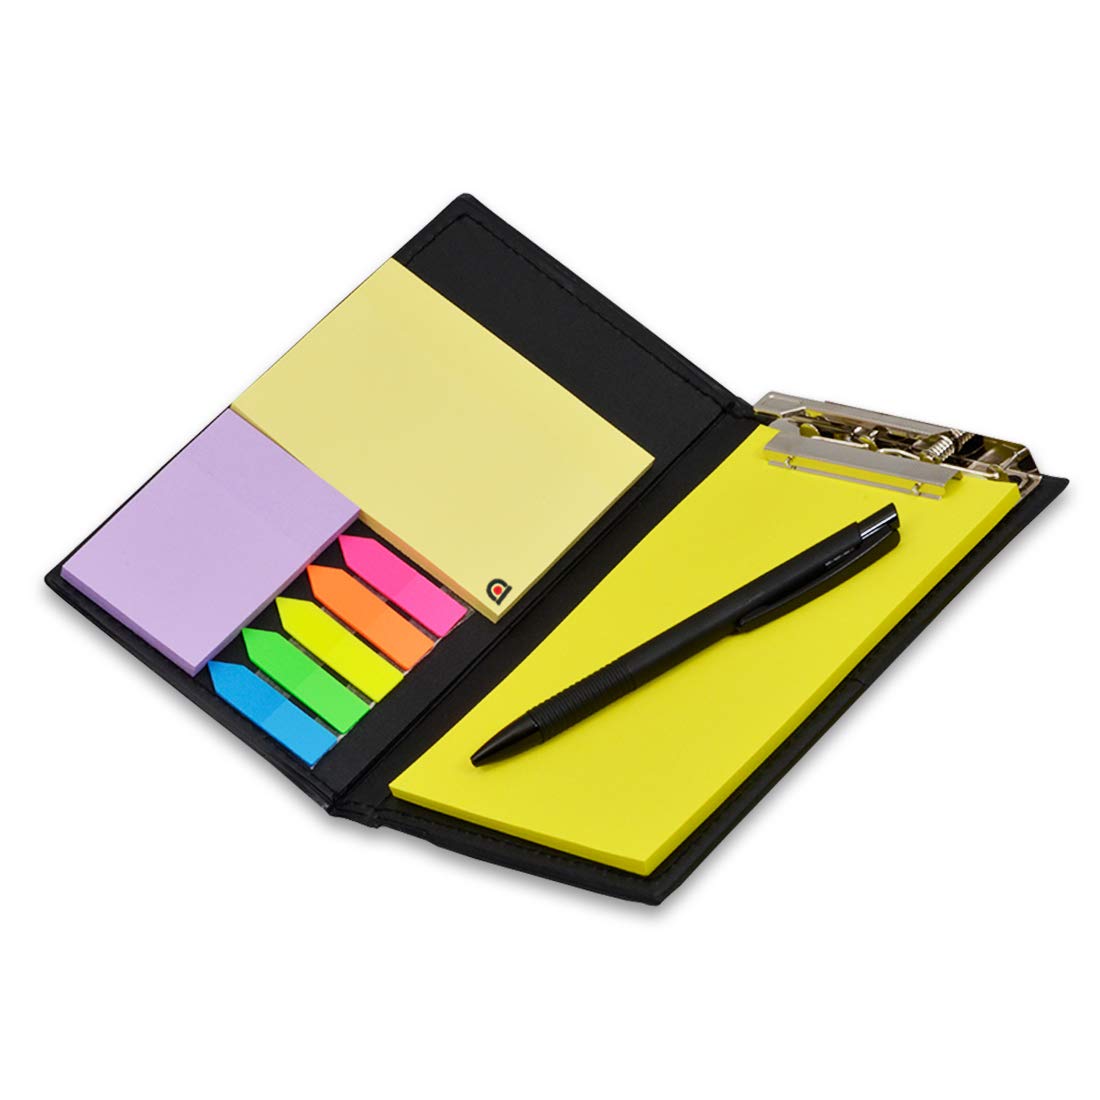 Buy Notepad Memo Holder Desk Organizer with Colorful Sticky Notes Stationery Gift Set with Pen